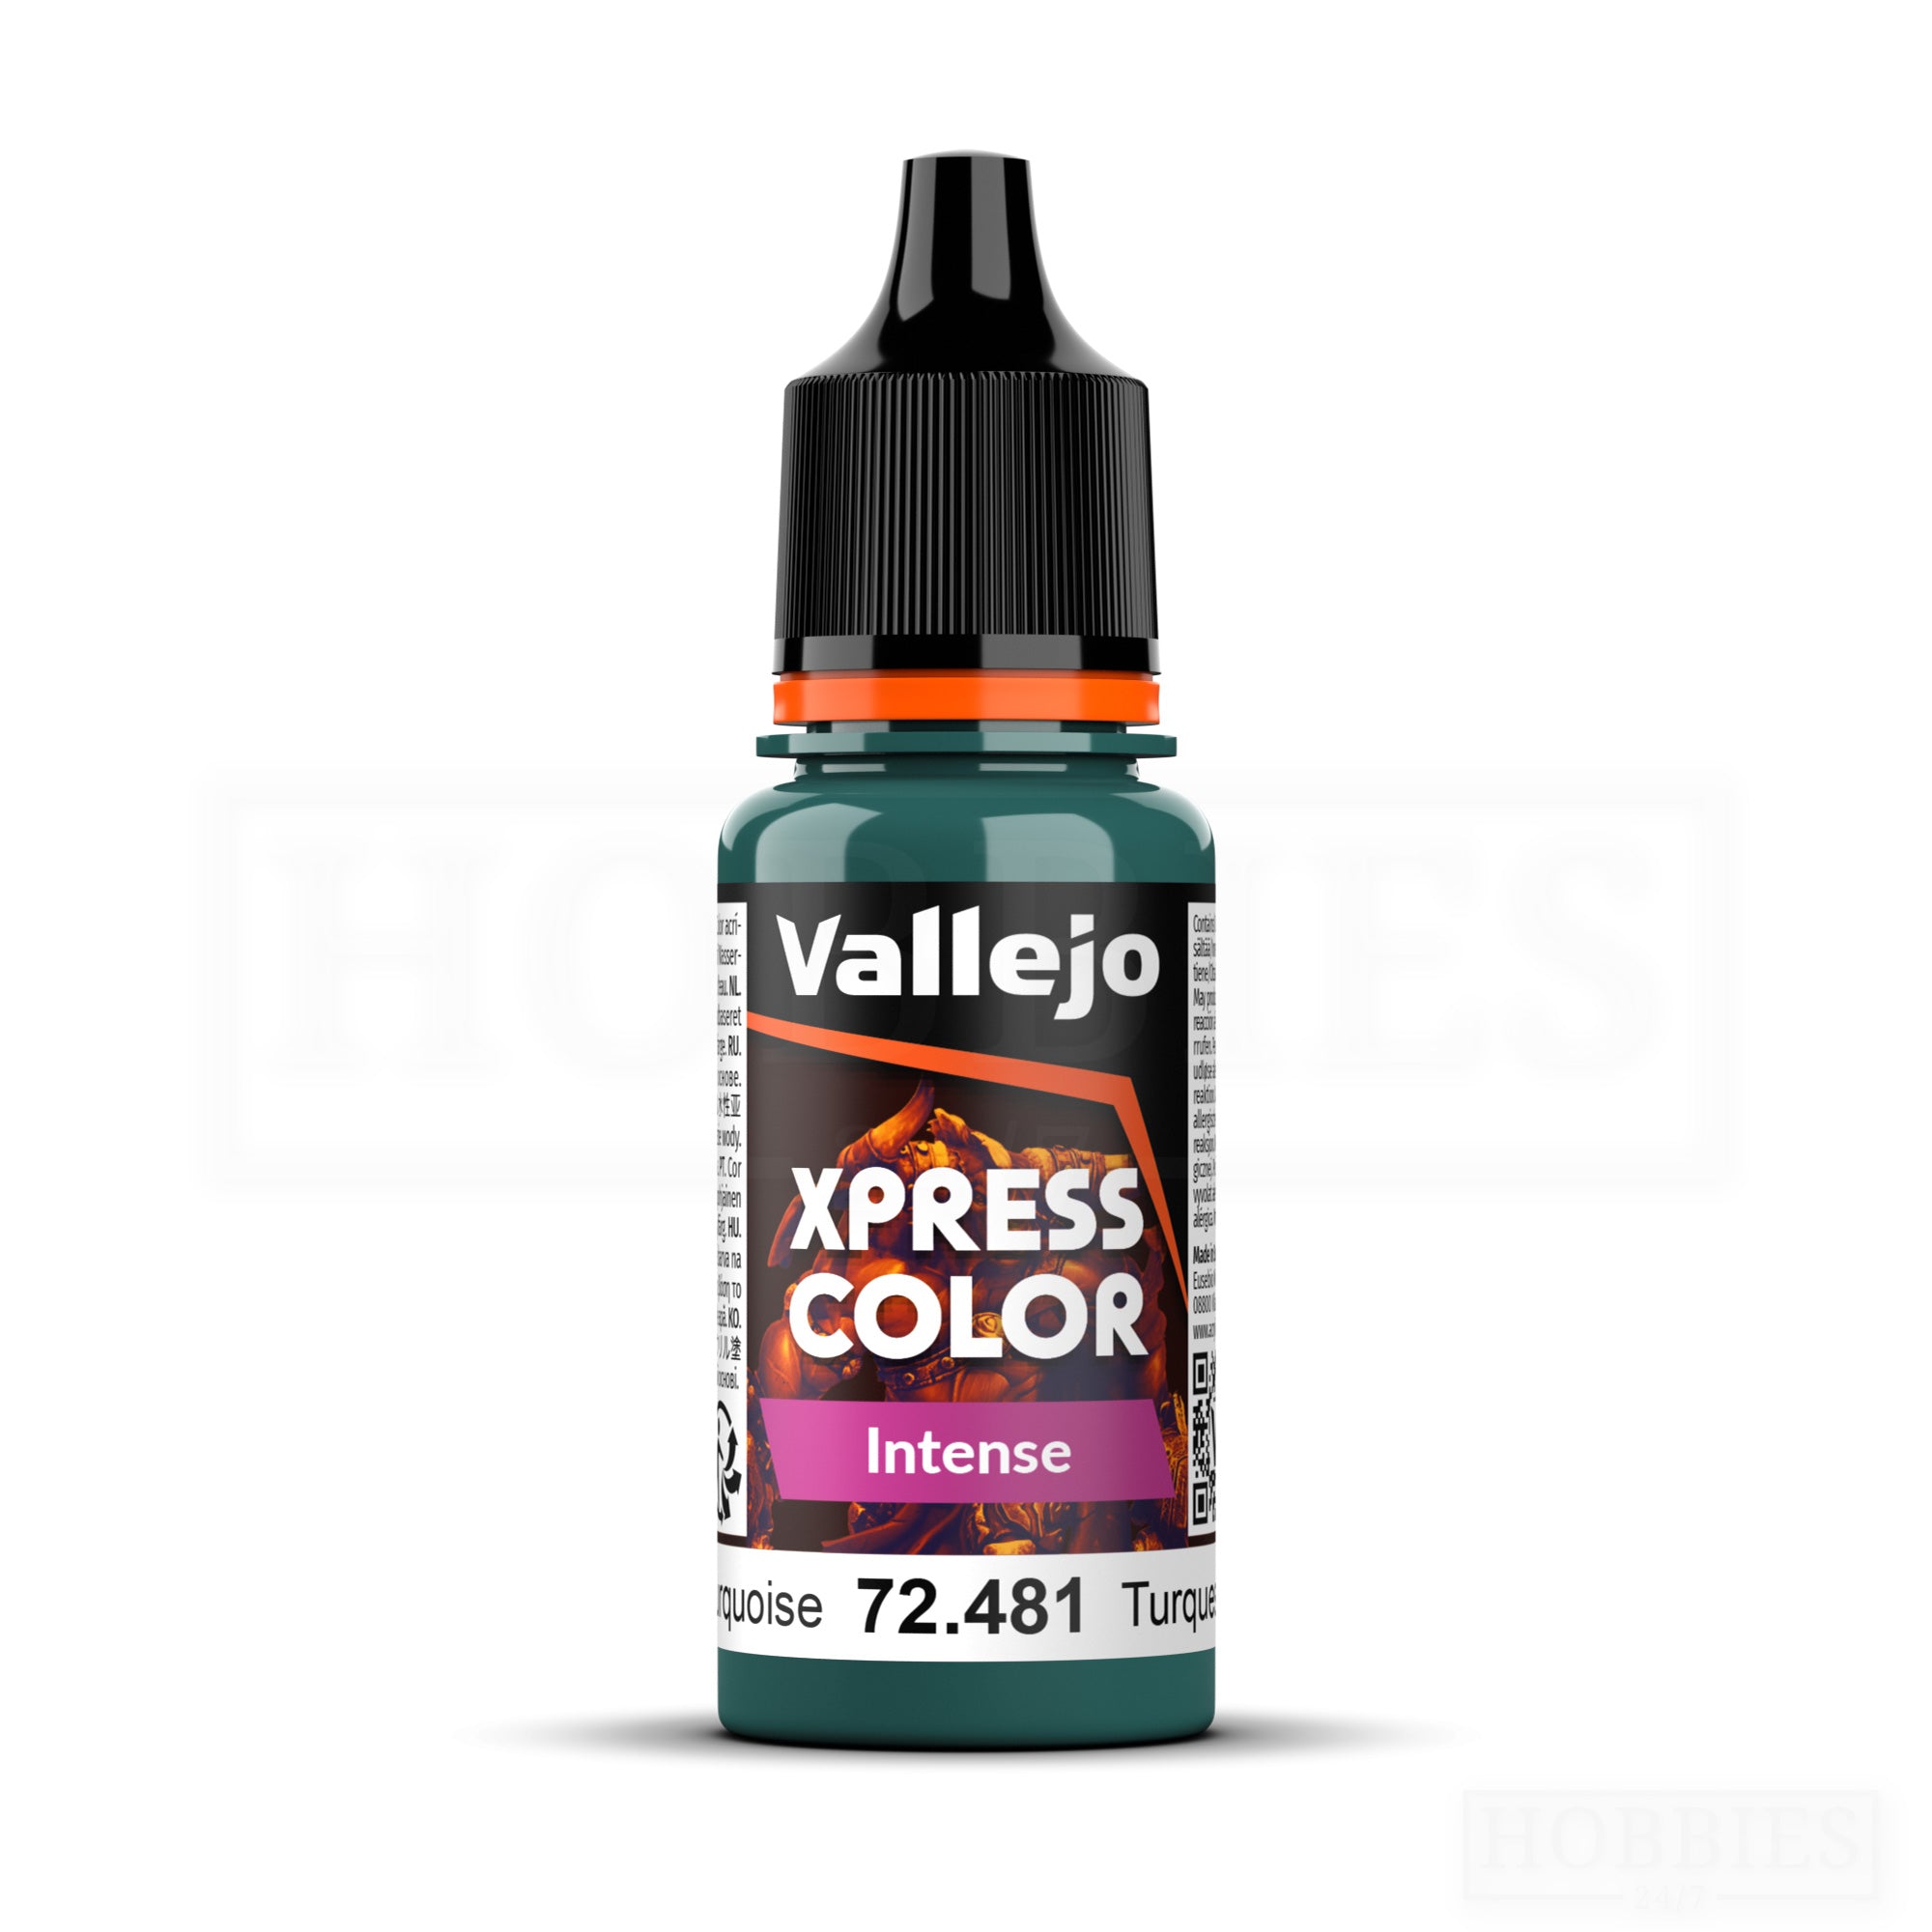 Vallejo Xpress Color Intense Heretic Turquoise 18ml